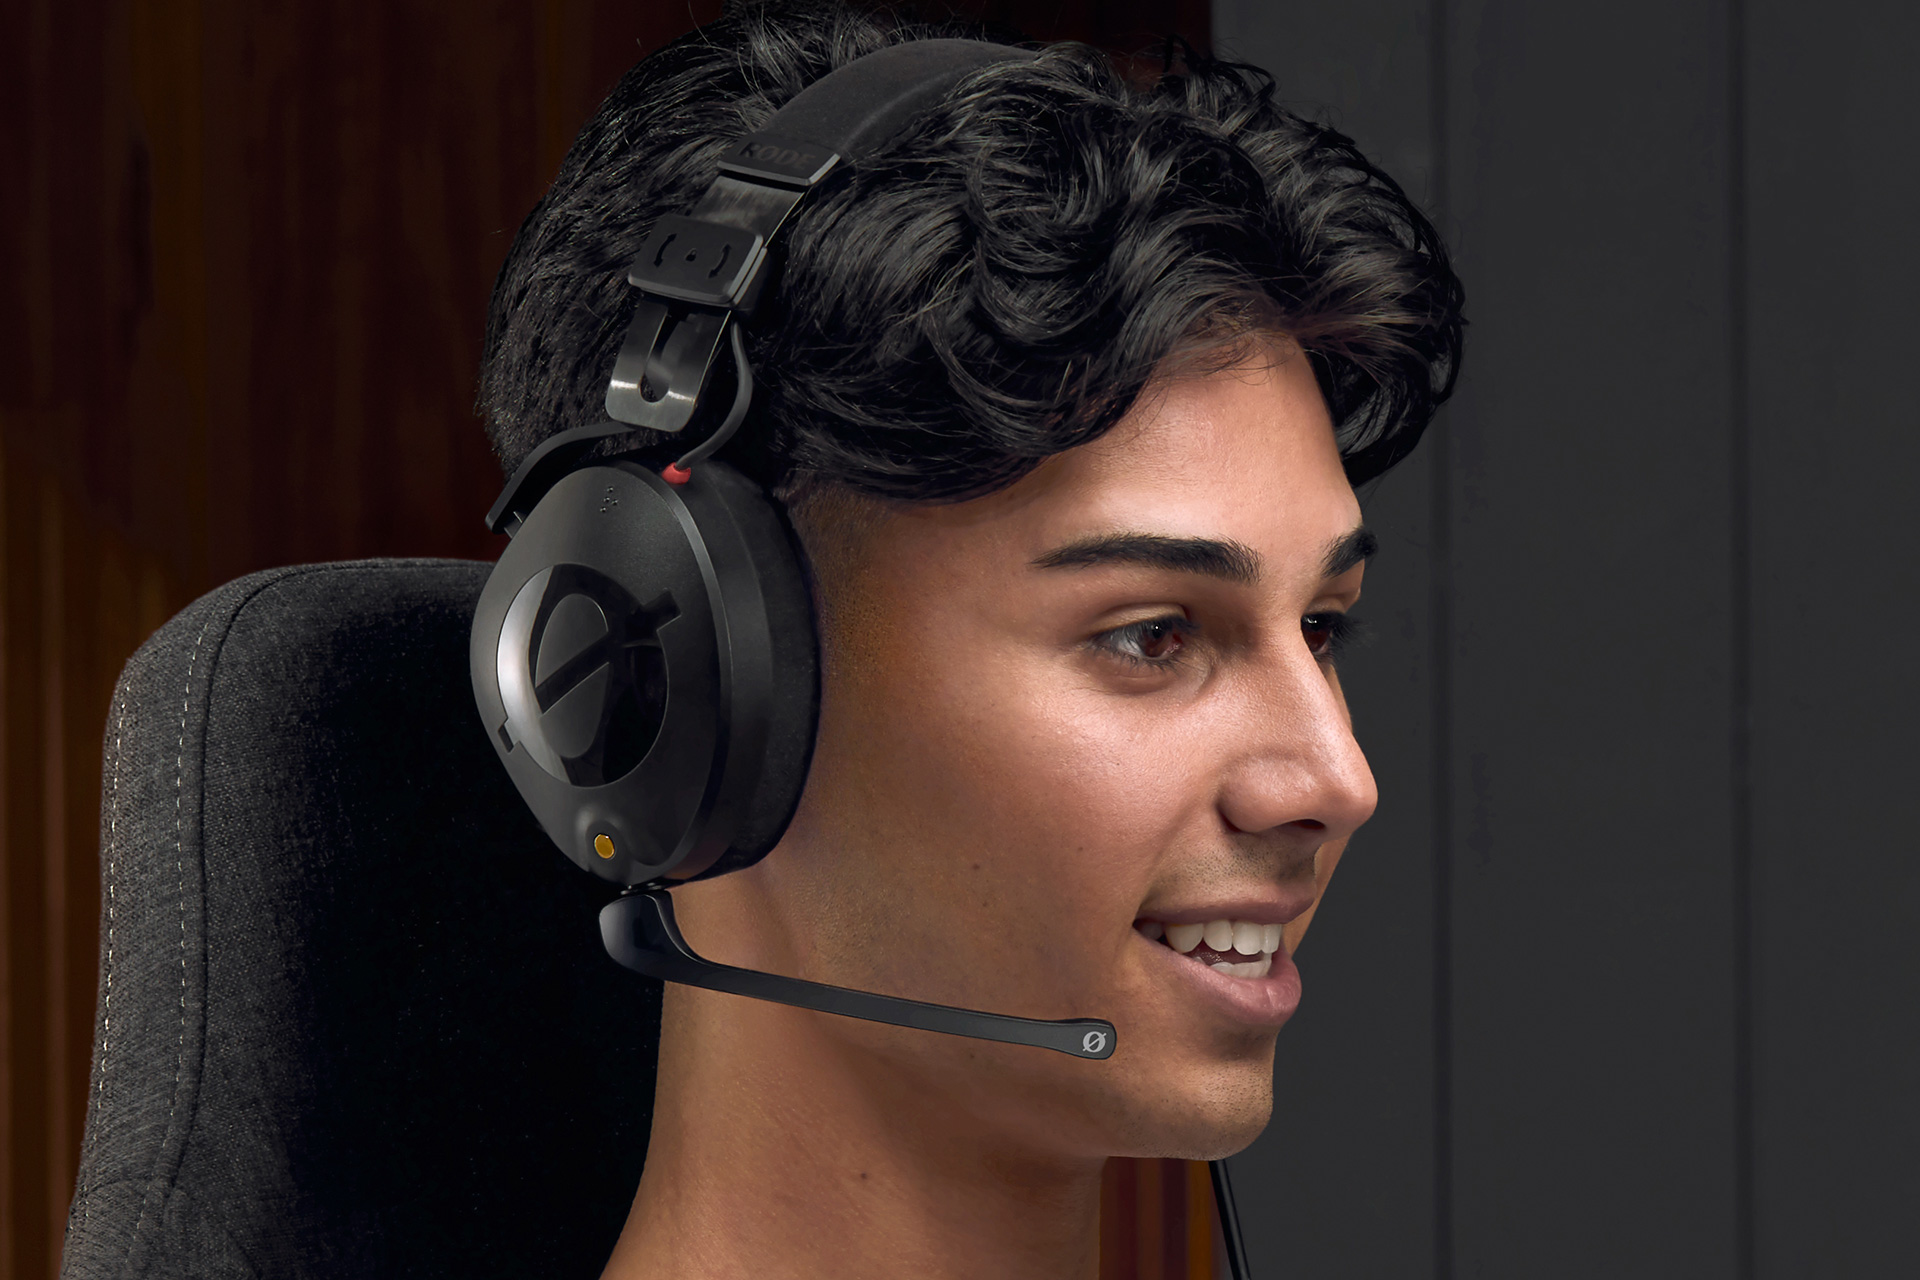 Rode's first headset is aimed at creators and gamers